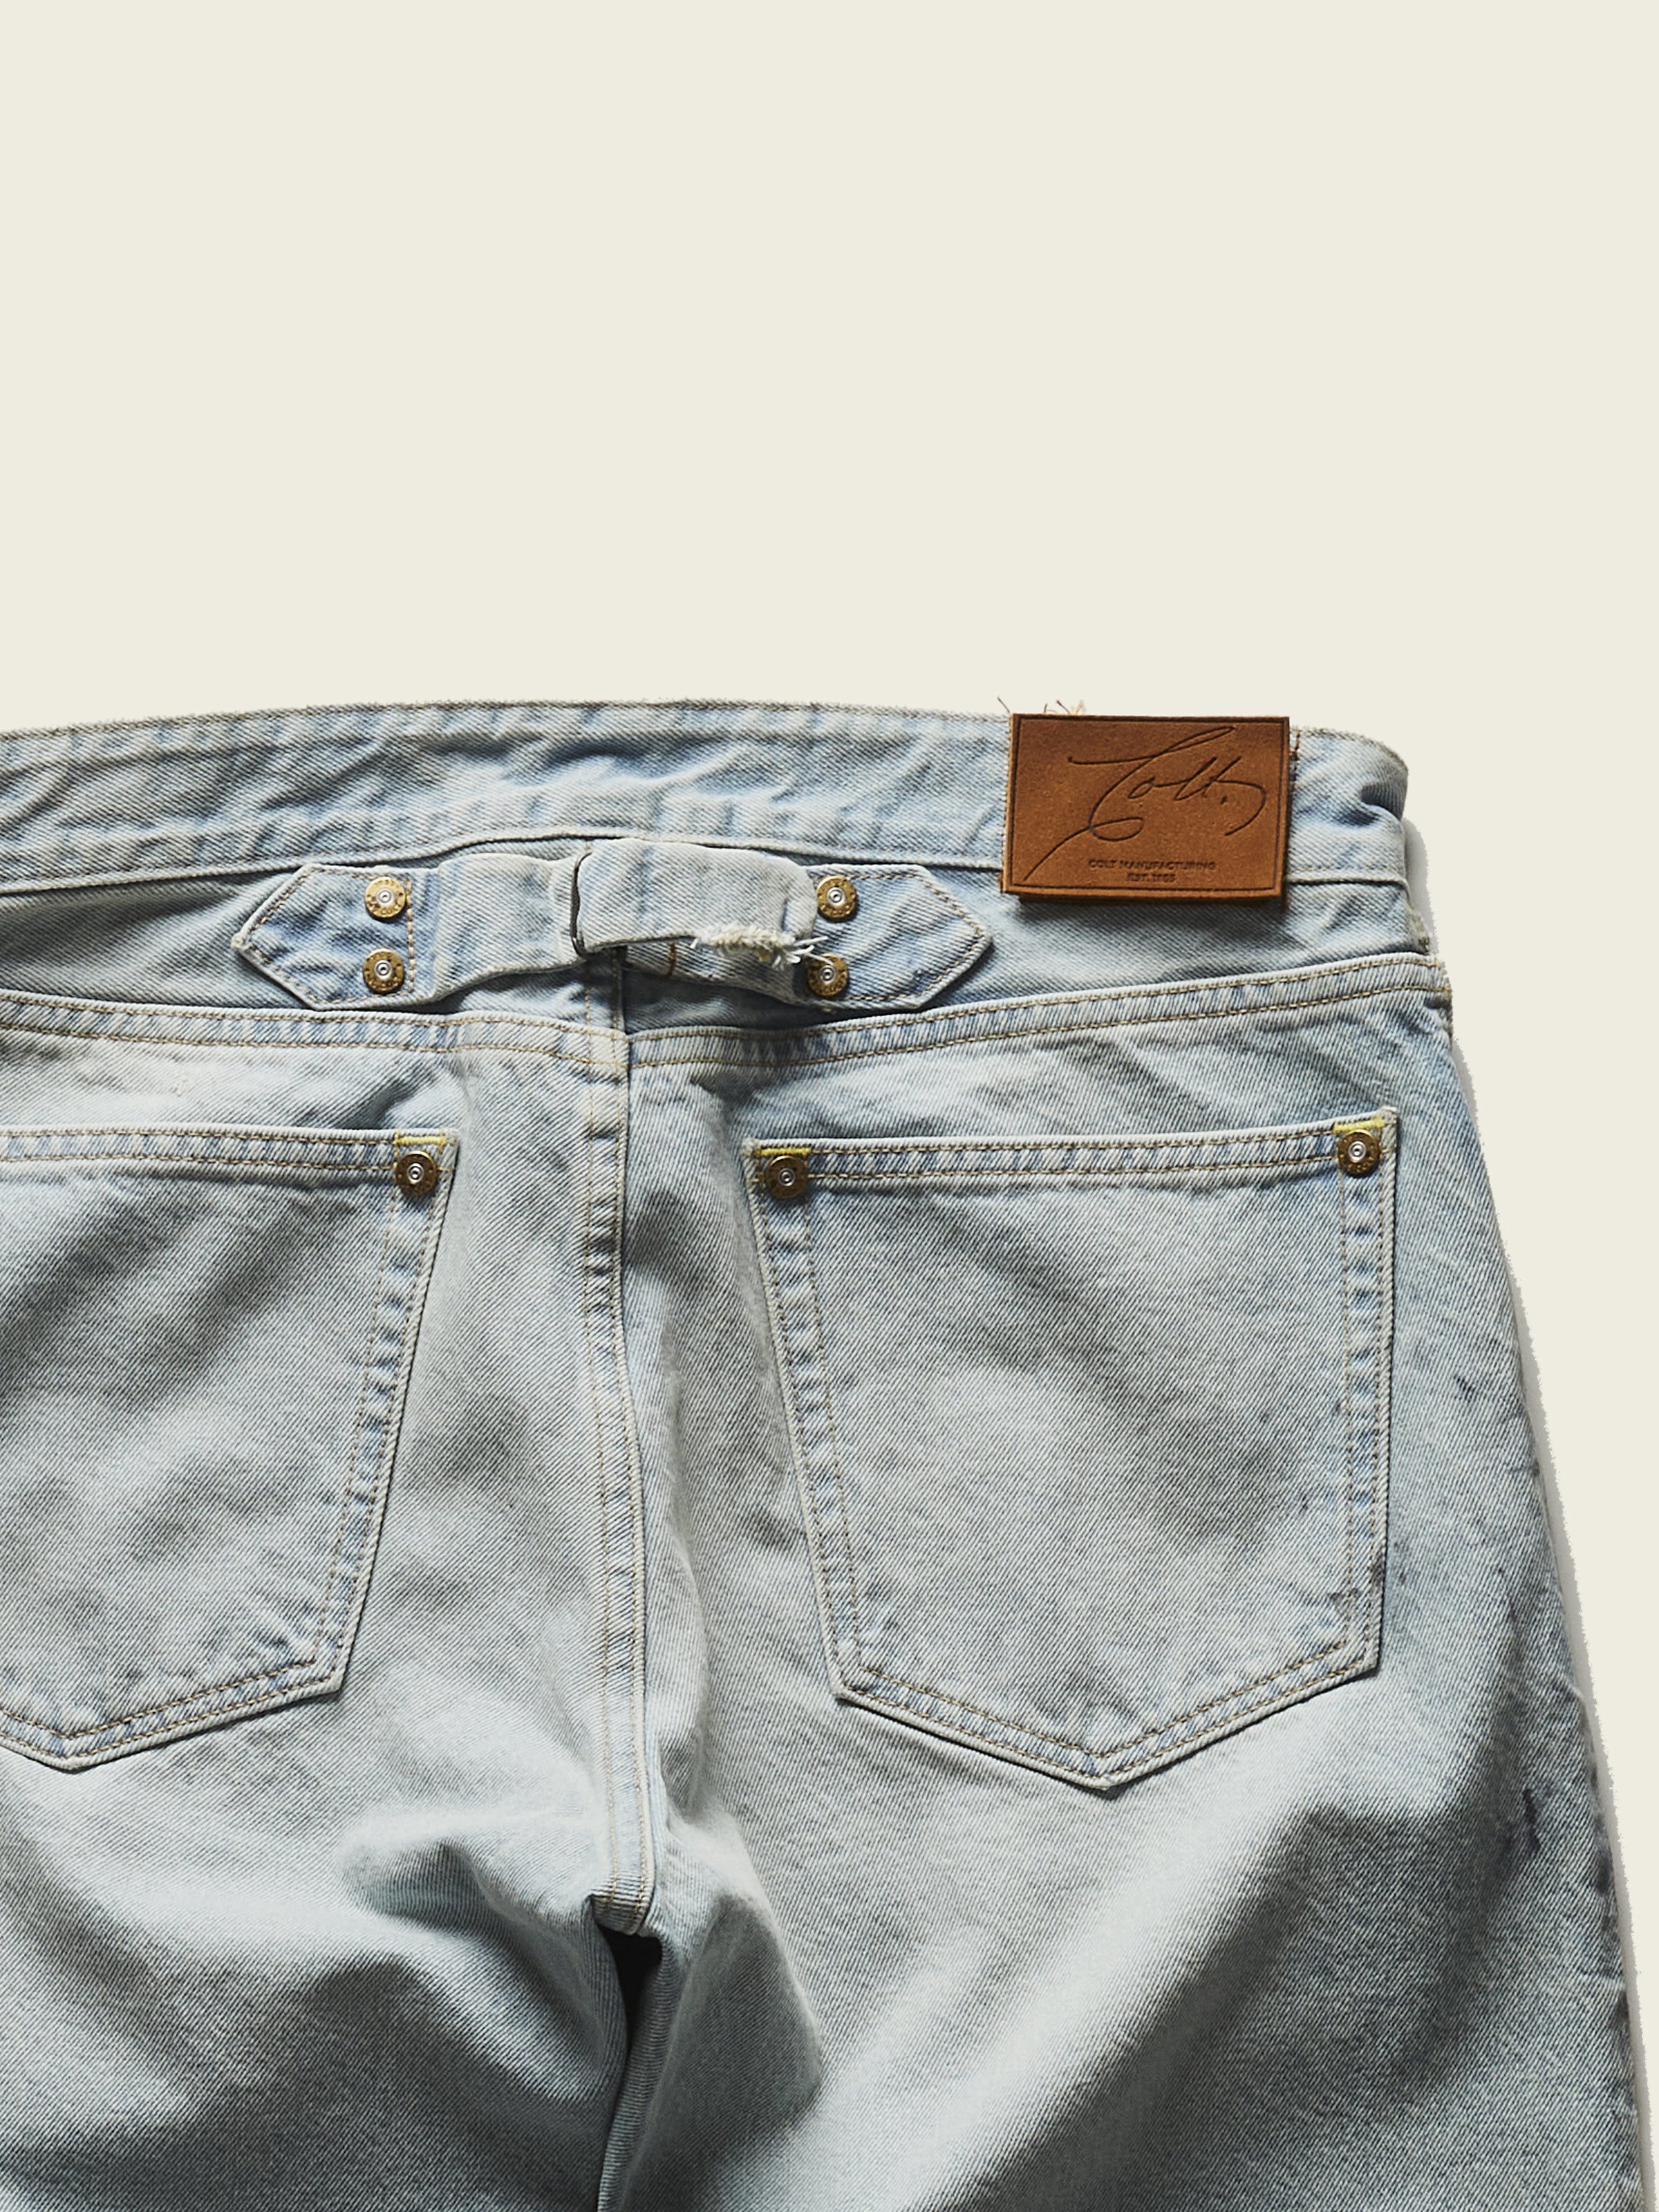 The Buckle Back Jean in Selvedge Denim with the Gunsmith Finish